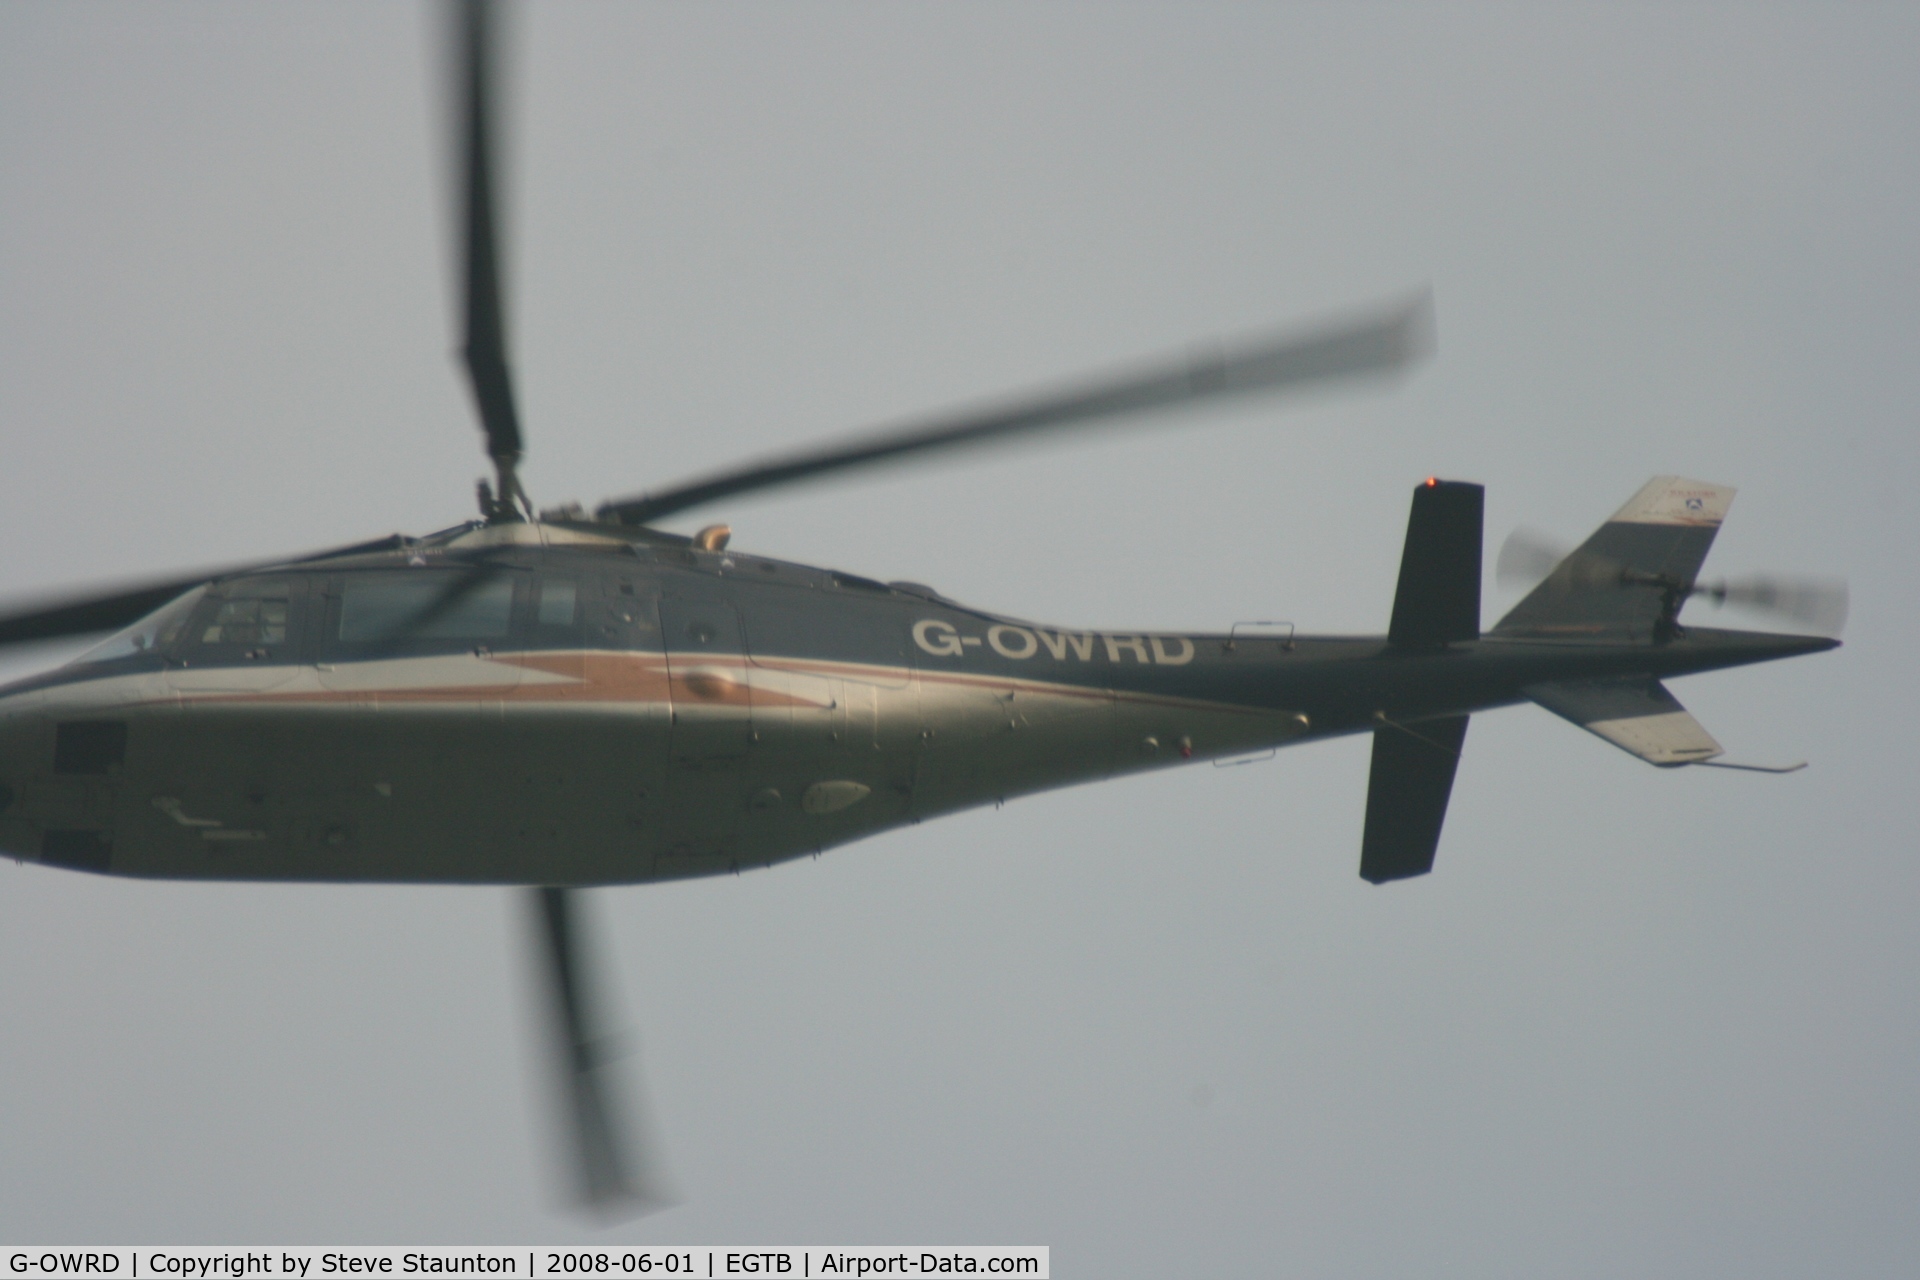 G-OWRD, 1991 Agusta A-109C C/N 7649, Taken at Wycombe Air Park using my new Sigma 50 to 500 APO DG HSM lens (The Beast)